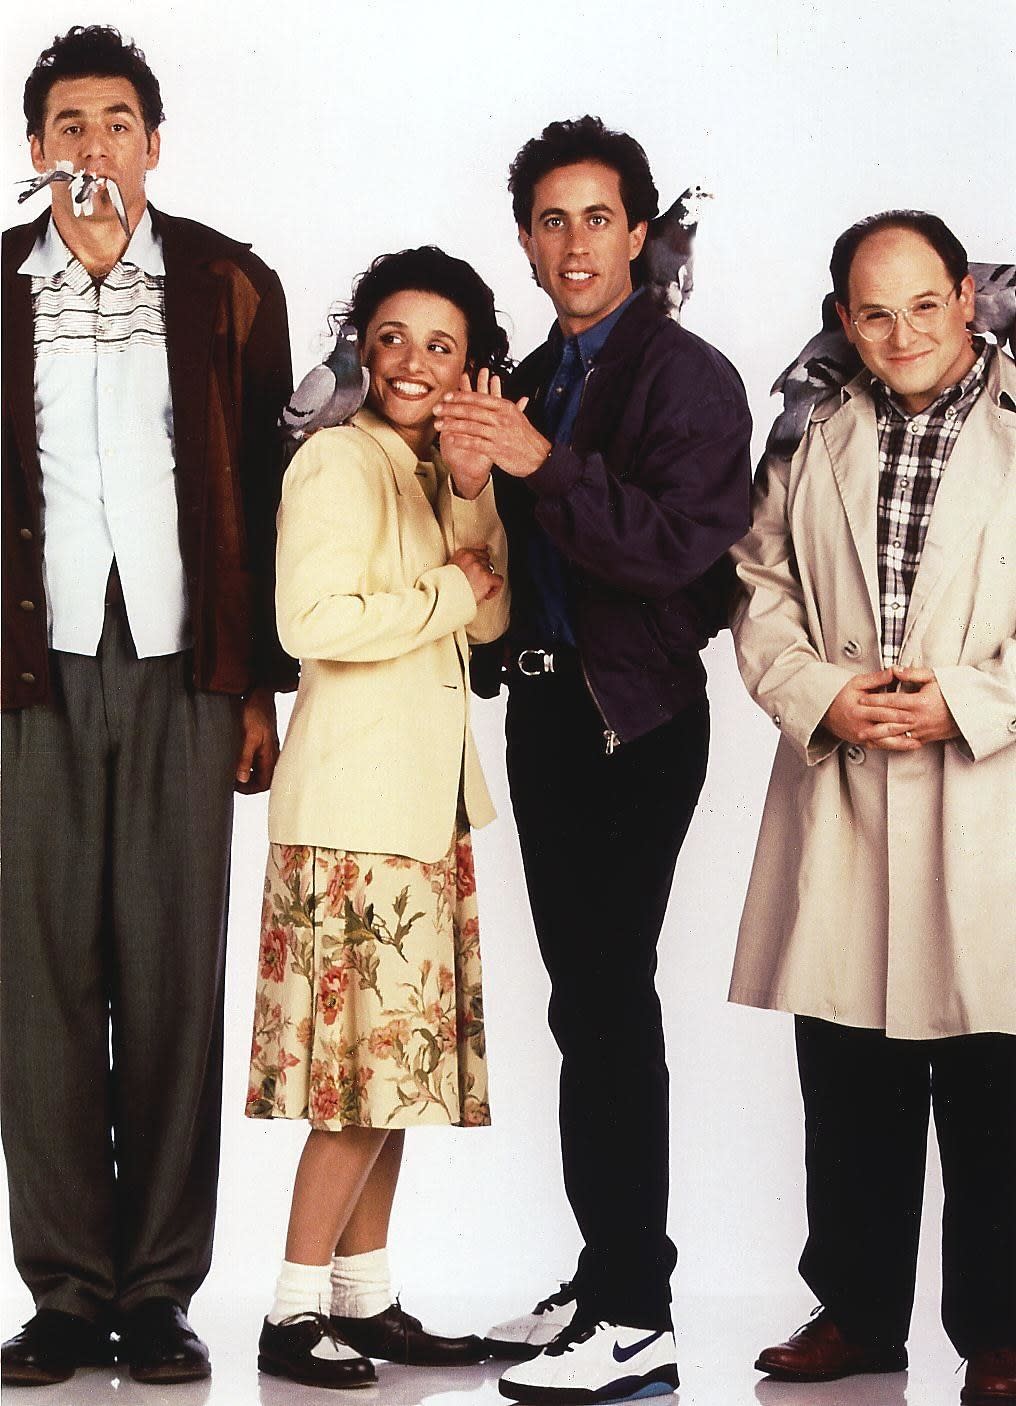 The cast of NBC's popularr comedy series "Seinfeld"